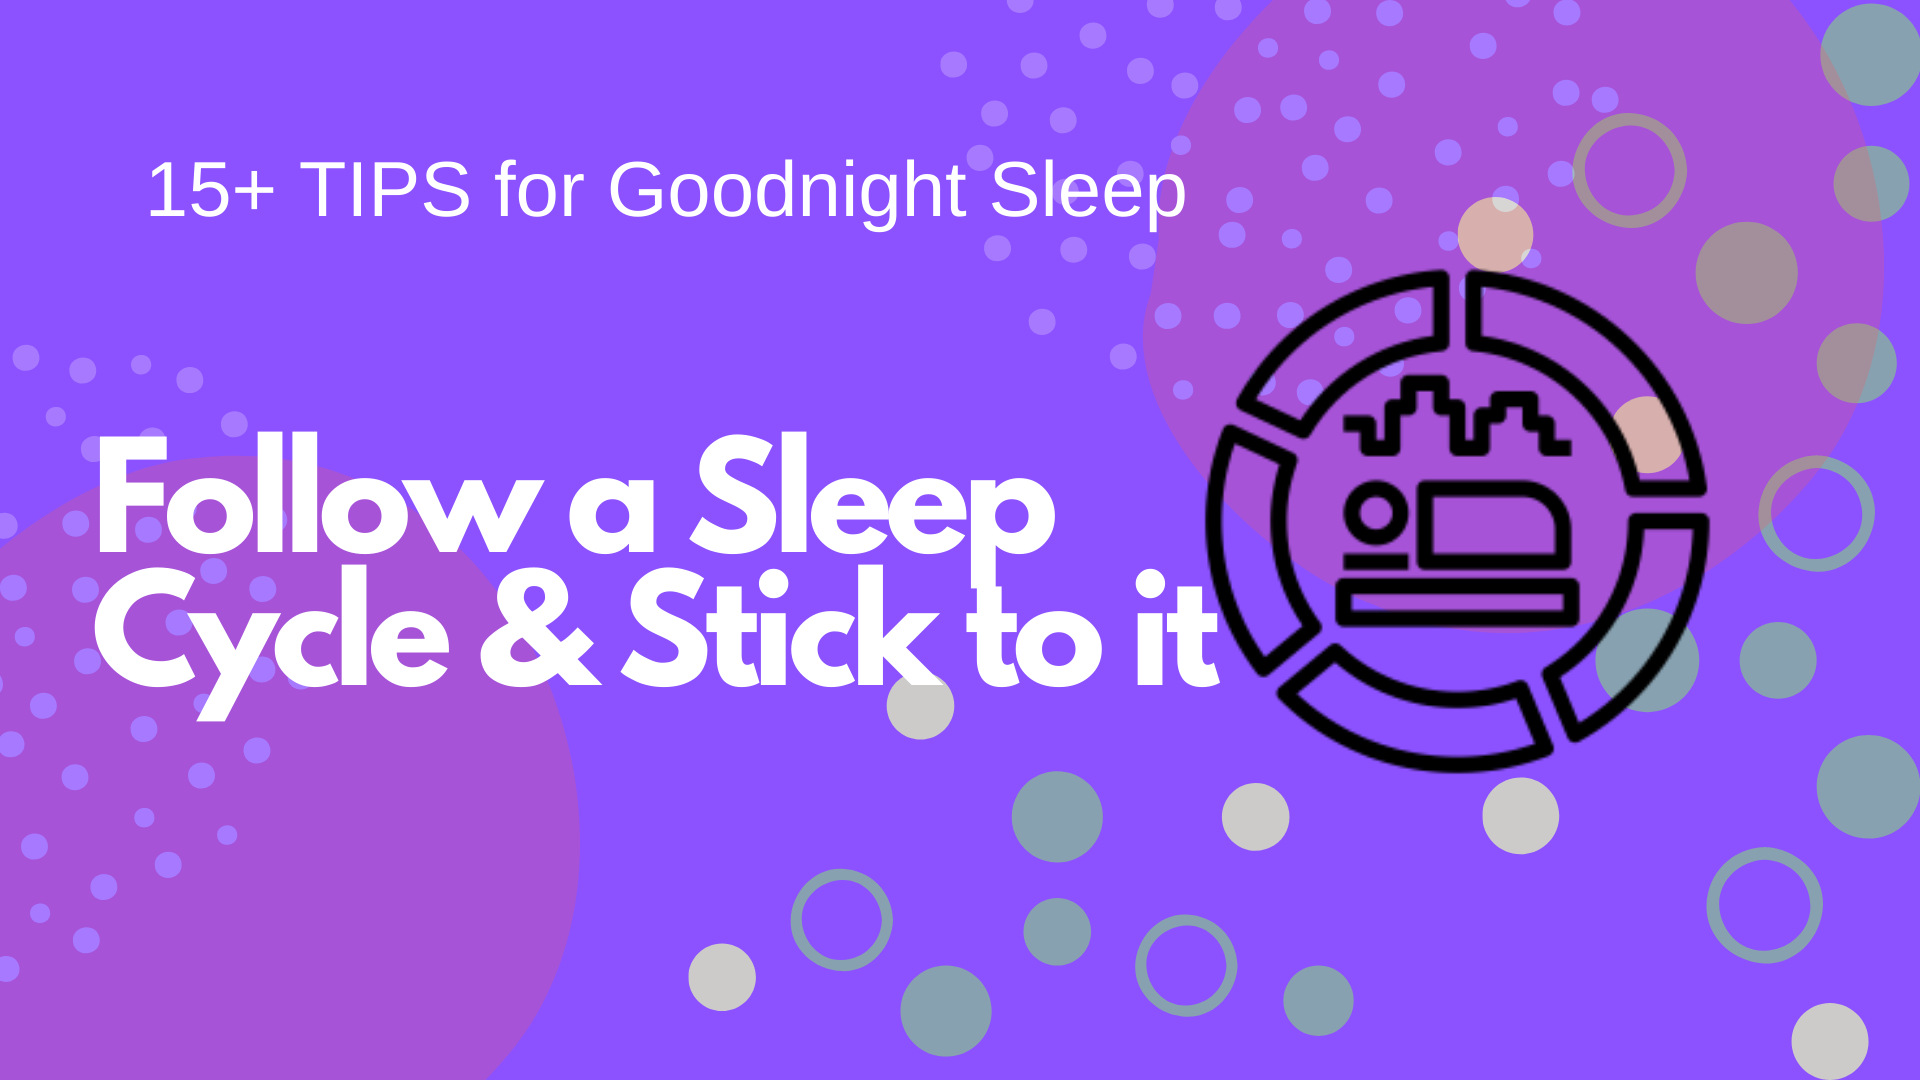 Follow a Sleep Cycle & Stick to it